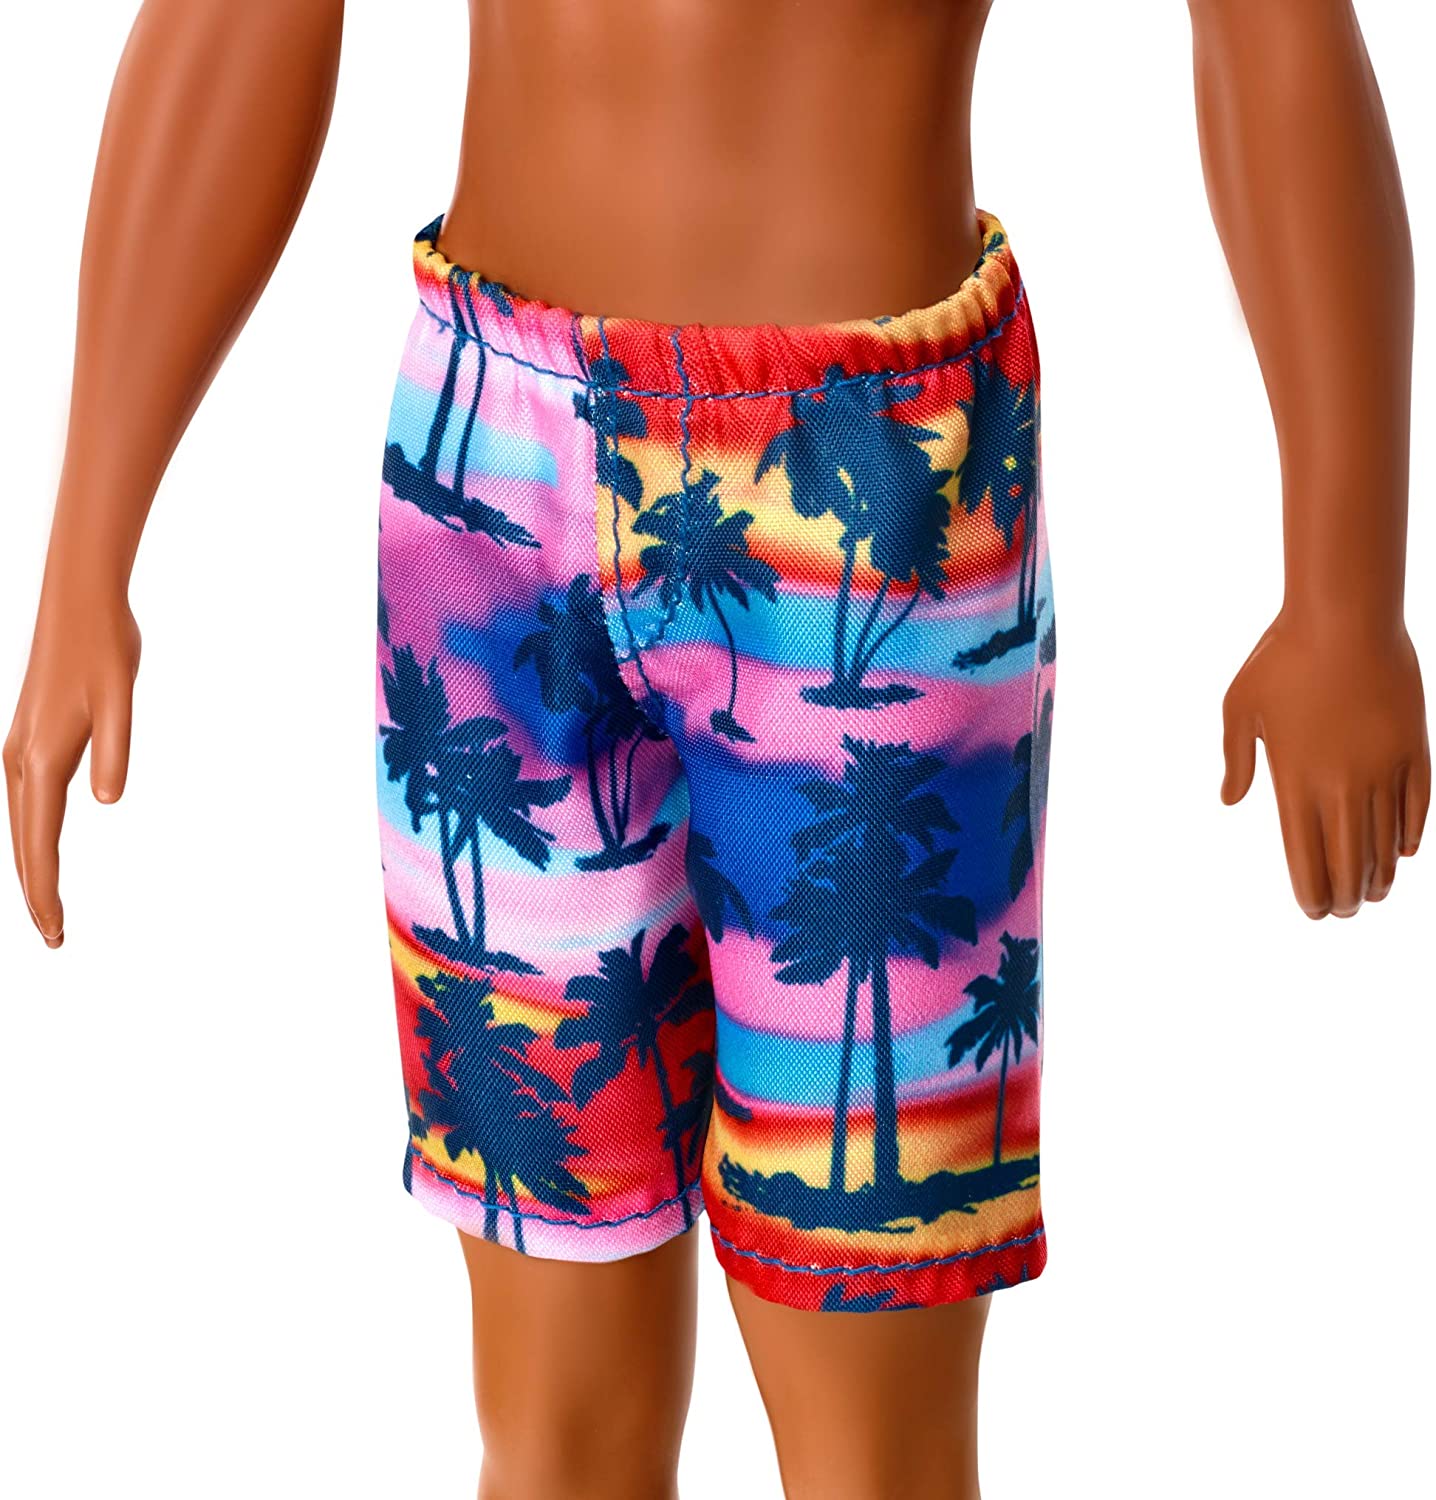 Barbie Ken Beach Doll Wearing Tropical Print Swimsuit, for Kids 3 to 7 Years Old 3